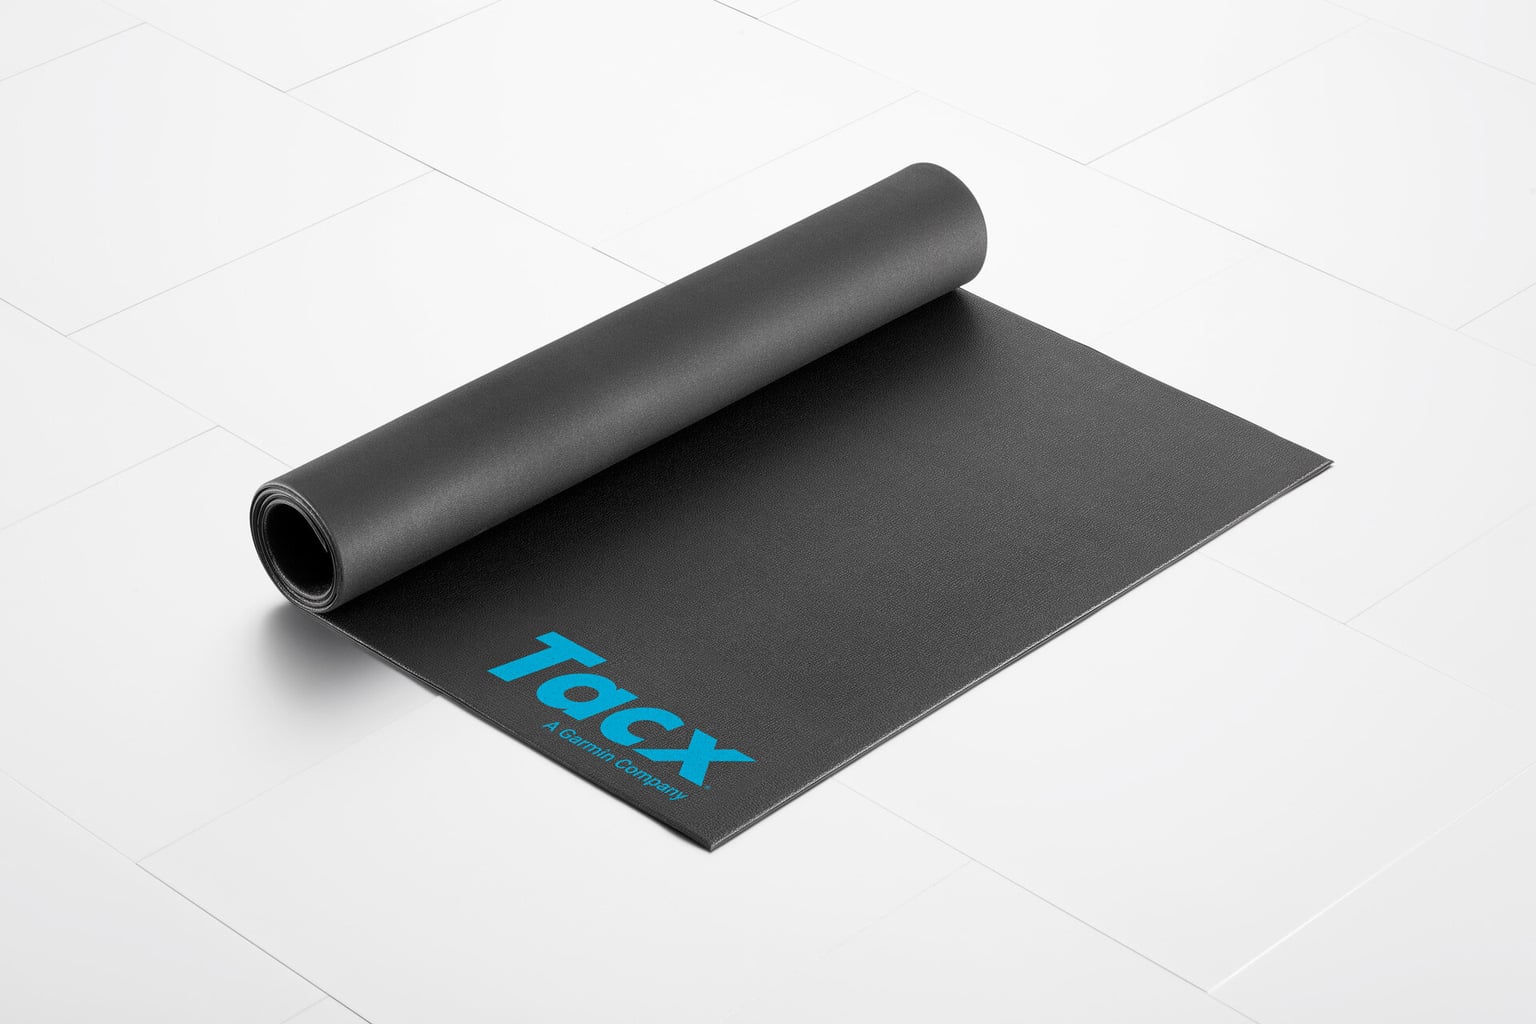 Tacx Tacx Trainermat Rollable Rollentrainer Zubehör 2